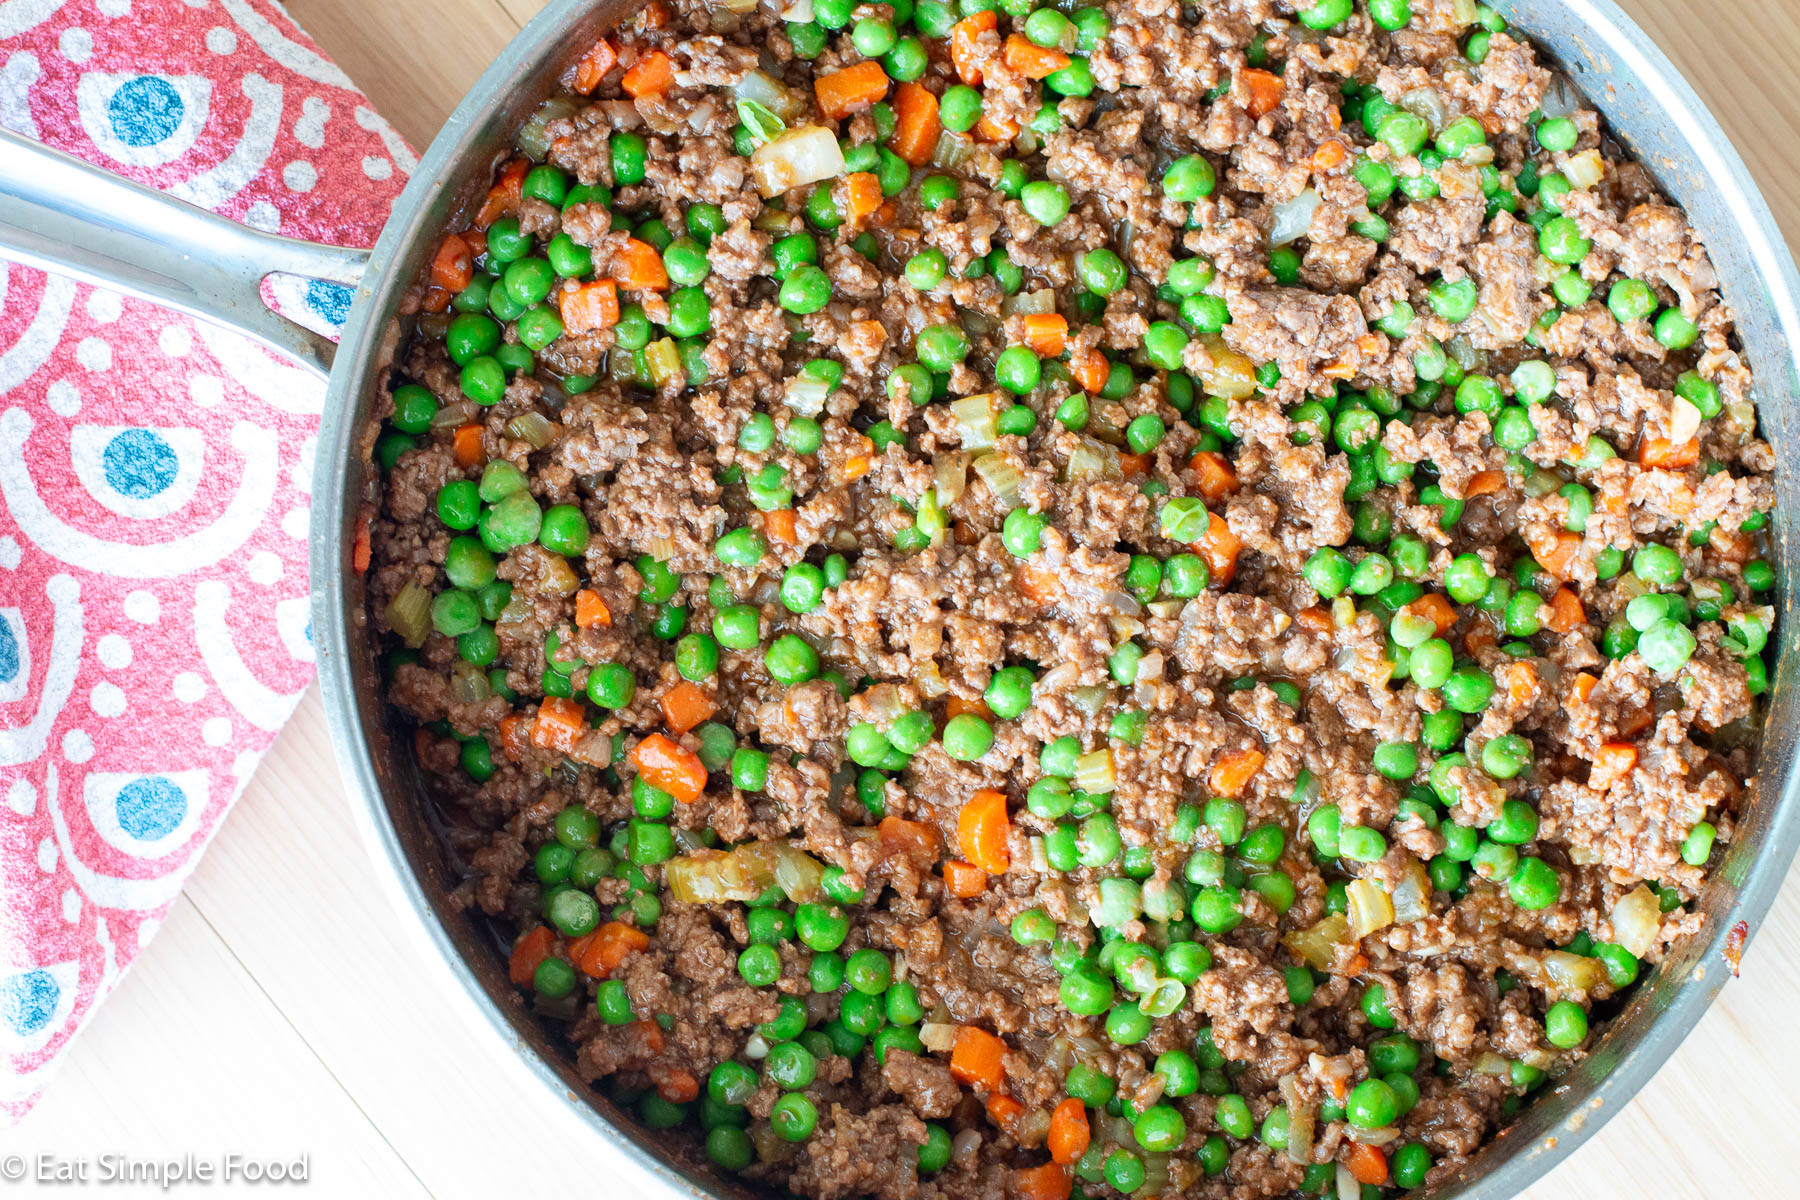 Top down view of a stainless steel pan filled with cooked ground beef and diced cooked carrots and green peas.